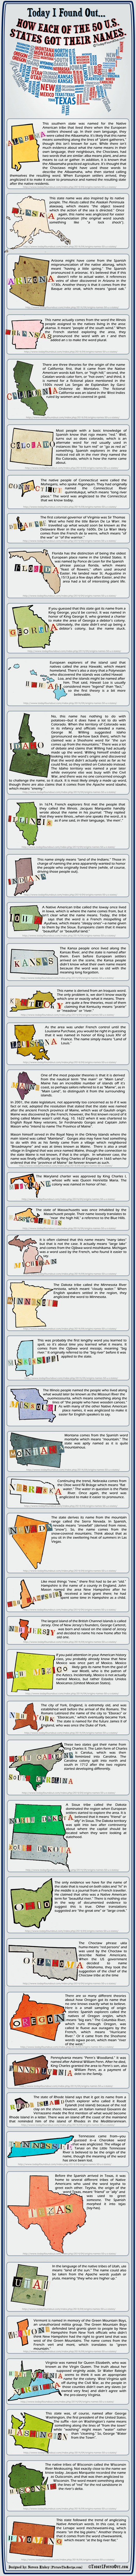 How Each Of The 50 Us States Got Their Names Infographic Chris